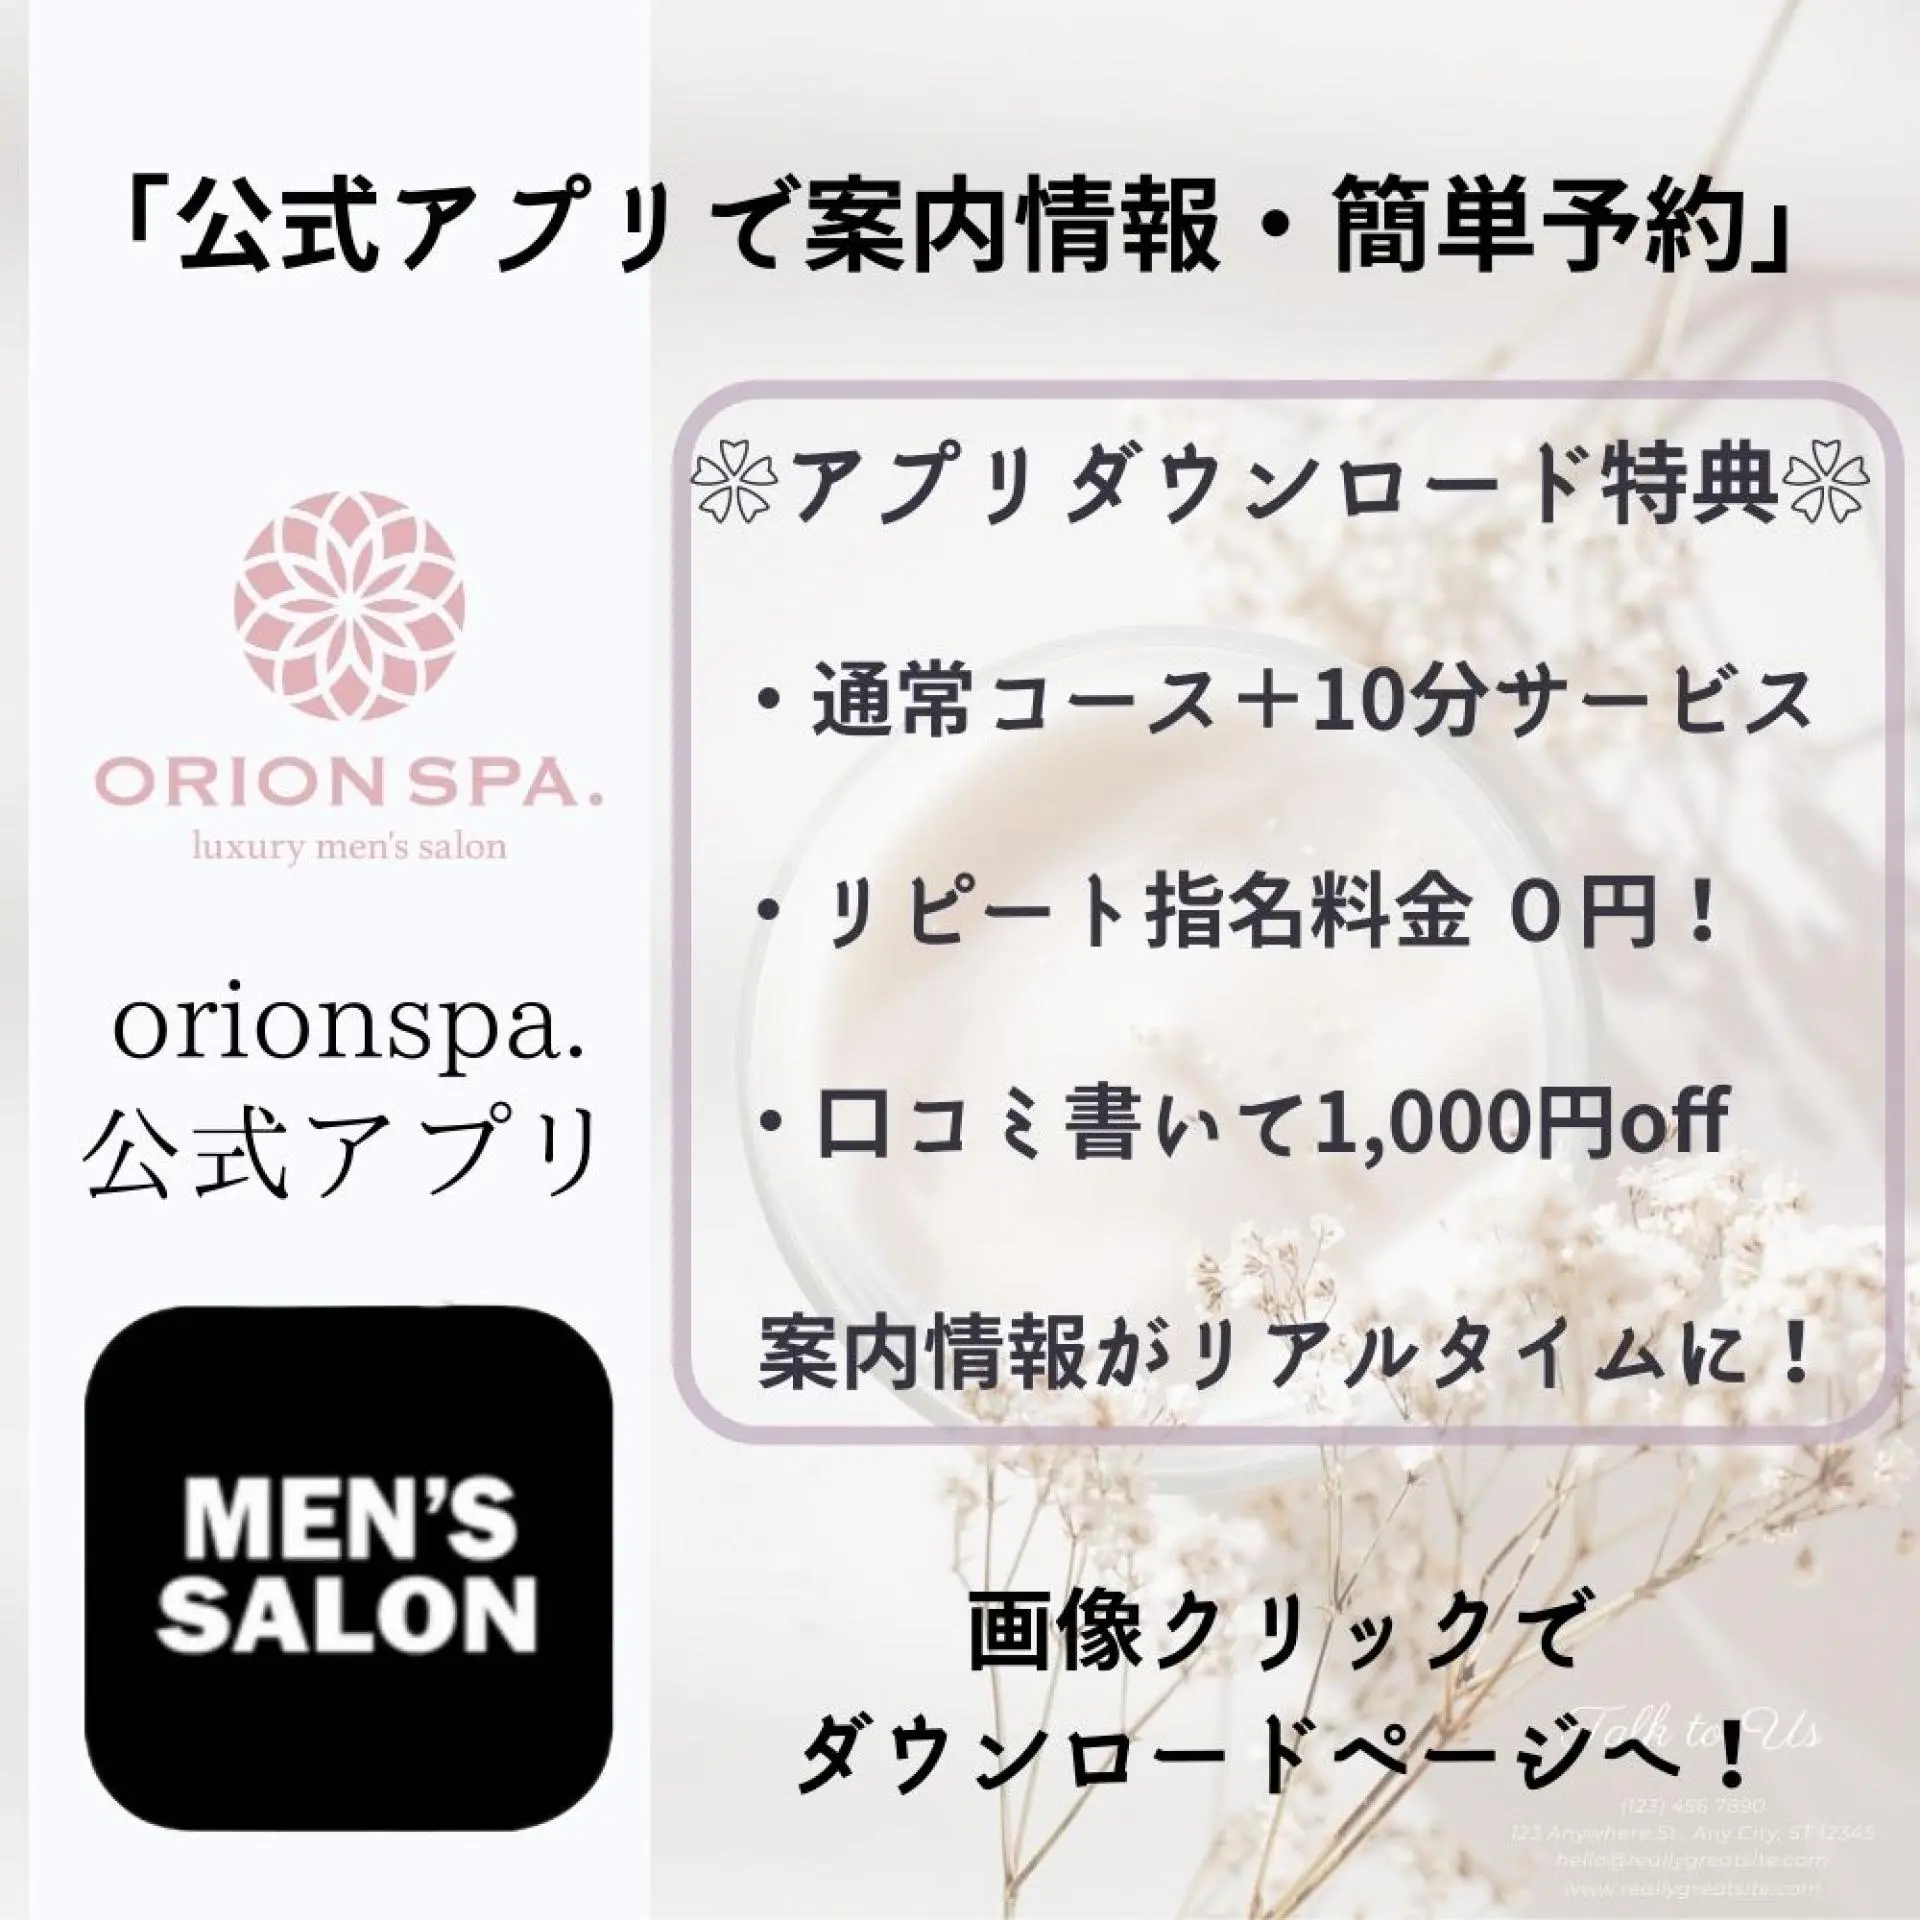 ORION SPA 専用予約アプリ